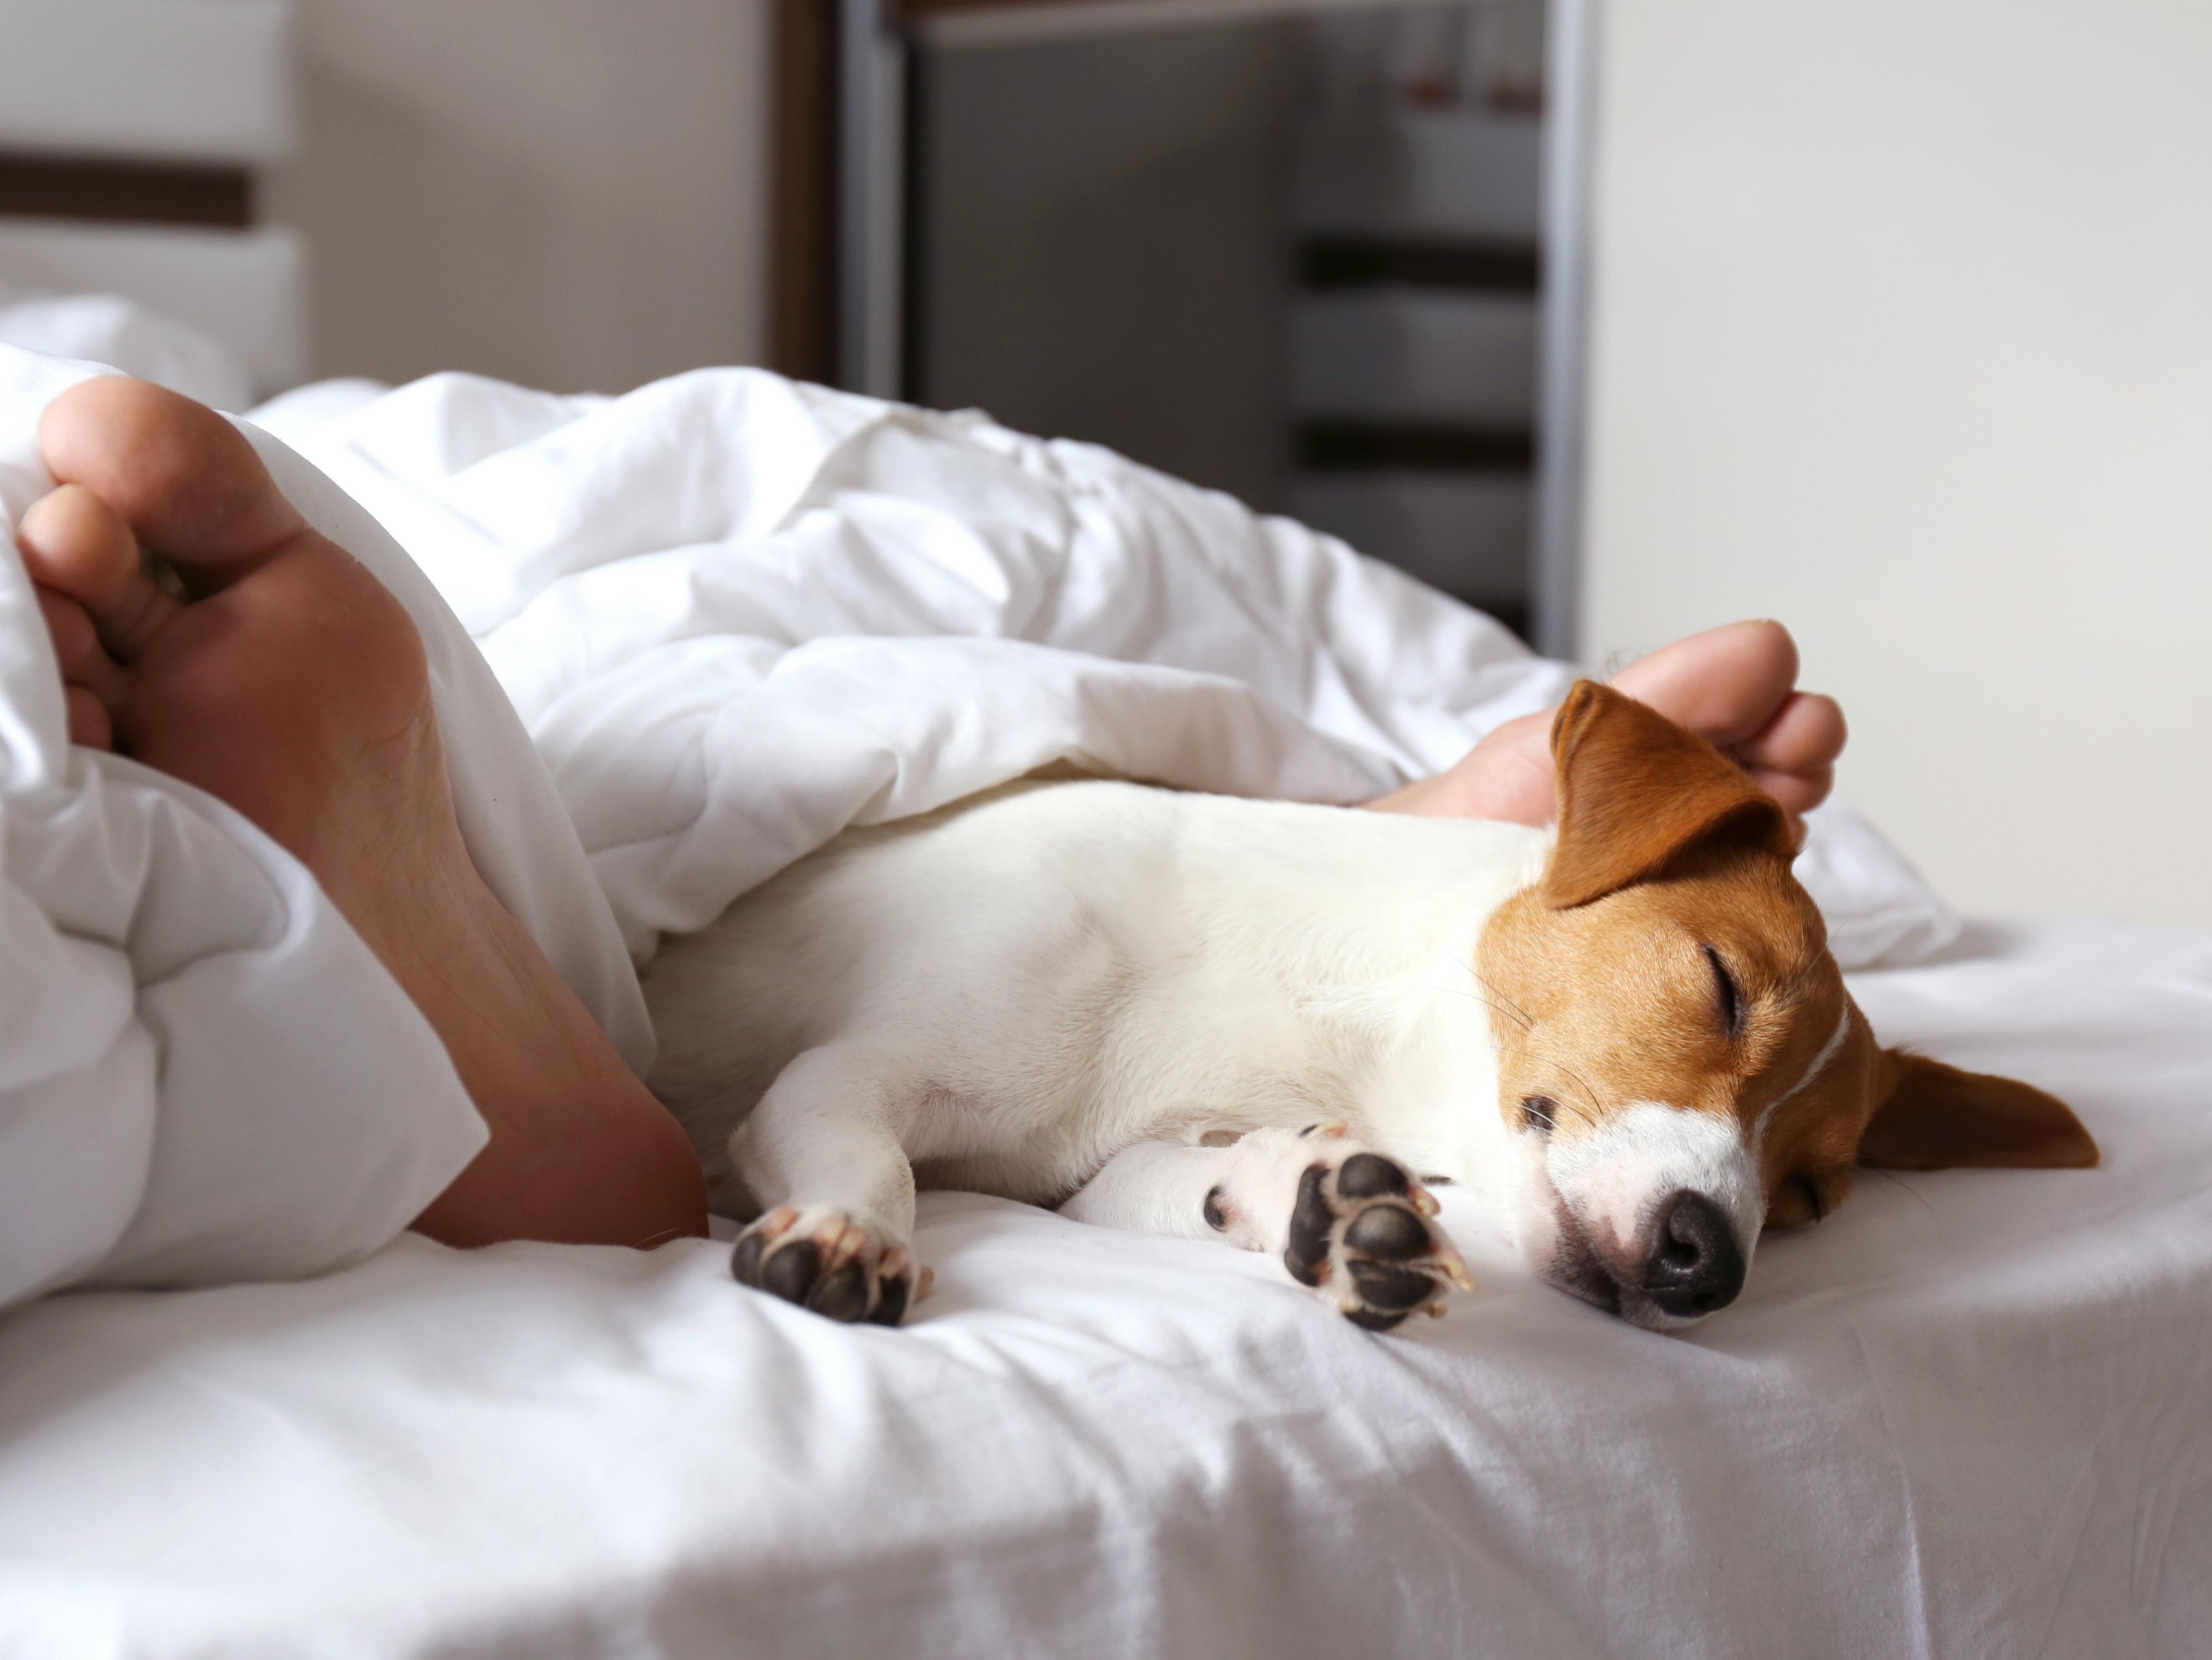 Our hotel warmly welcomes one dog or cat per room, ensuring a delightful stay for both you and your furry friend. A nominal EUR 20 per night ensures their comfort and happiness during your visit.